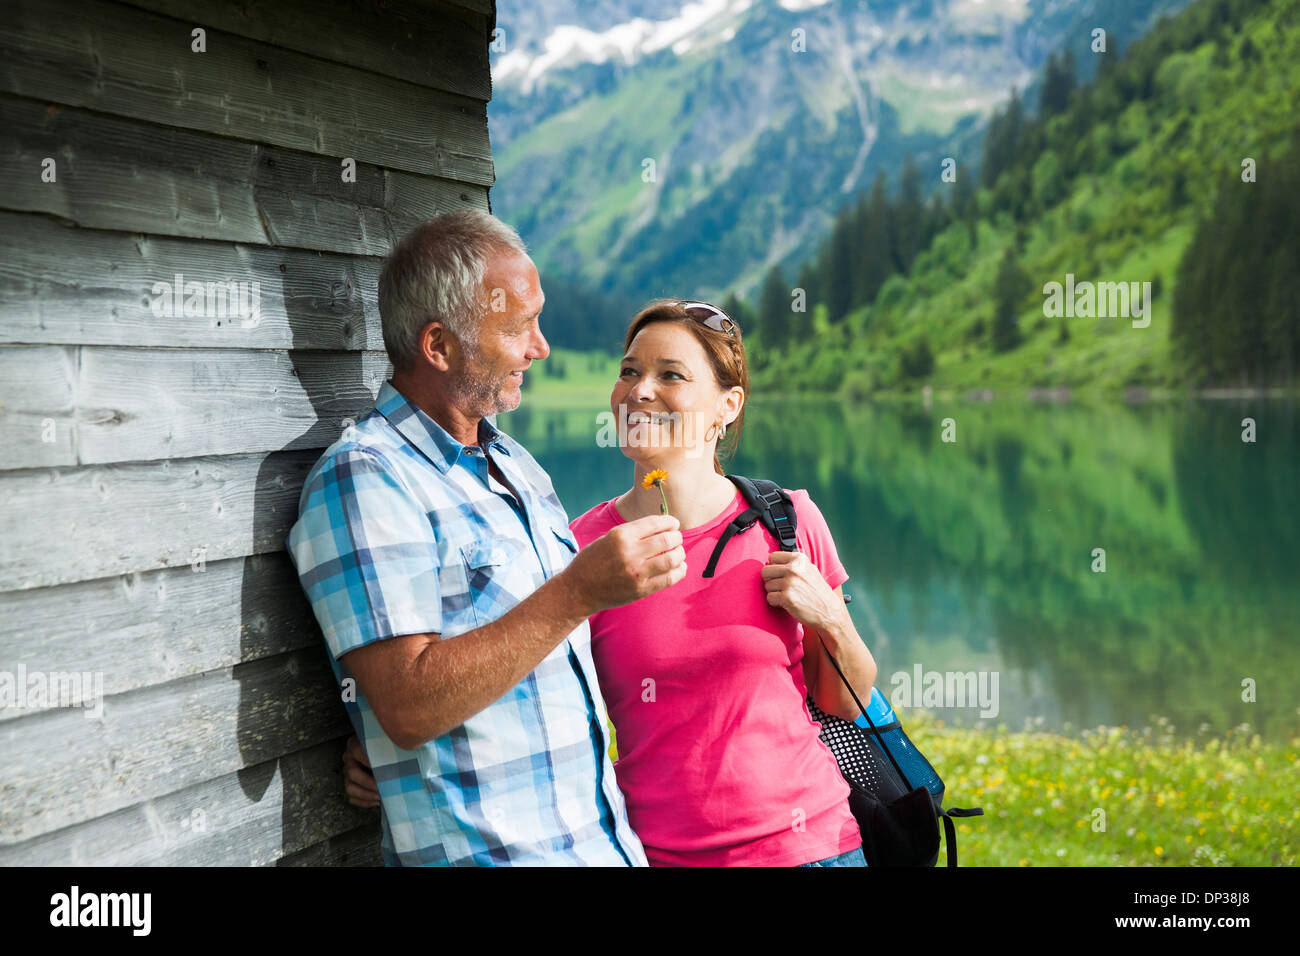 Mature man offering flower to mature woman, standing next to building at Lake Vilsalpsee, Tannheim Valley, Austria Stock Photo